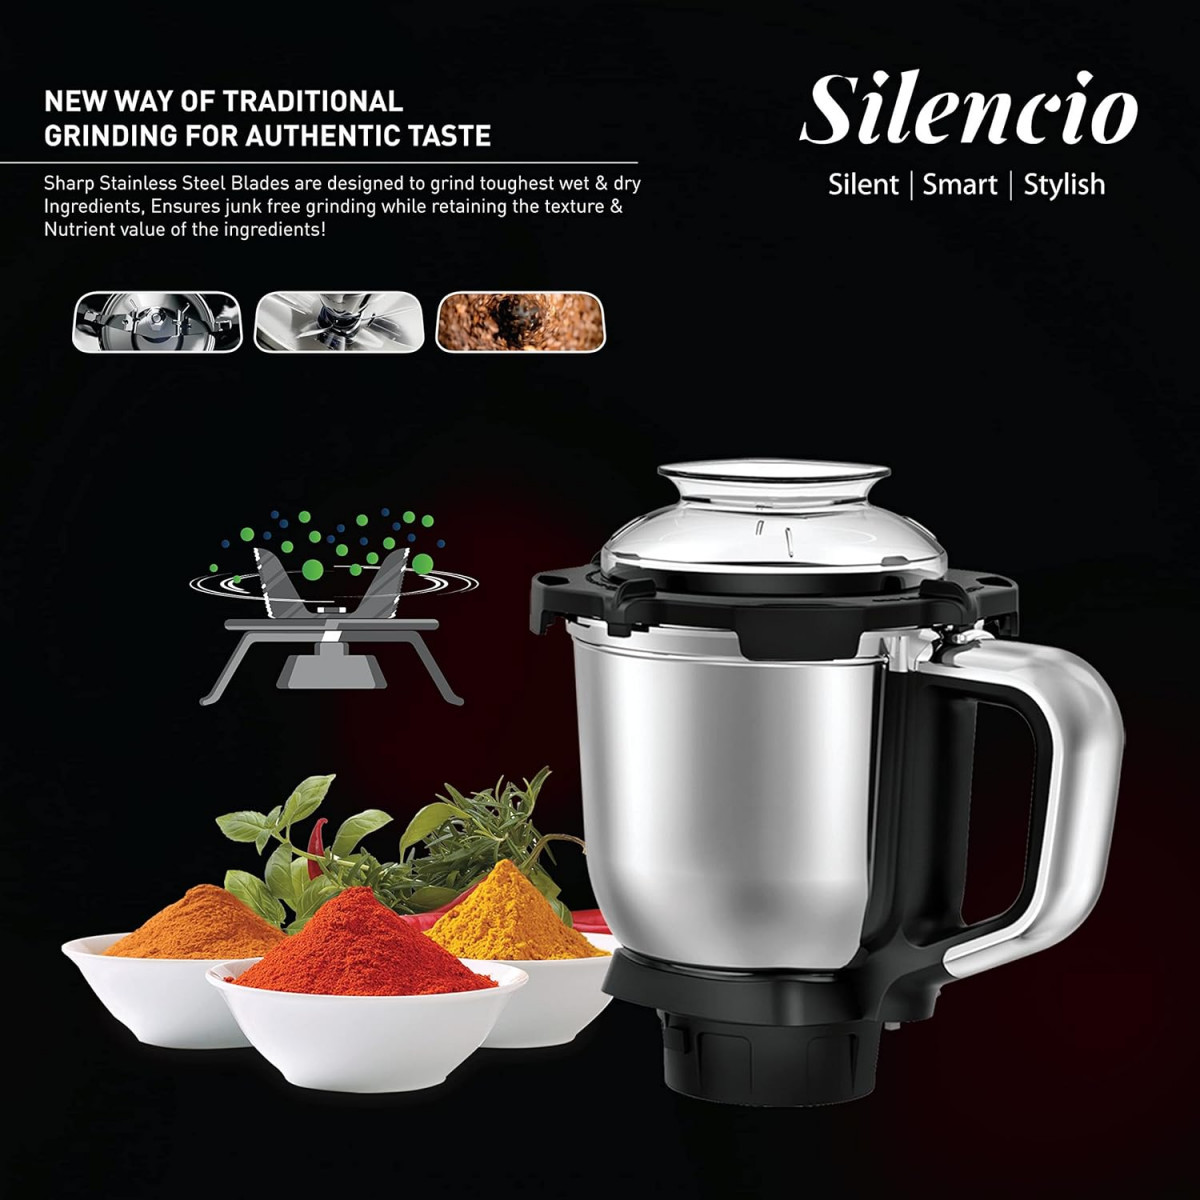 Havells Mixer Grinder Silencio  Powerful HVDC Motor Hands Free Operation  Triple Safety Protection  Double Layered Jars  Smart Digital Control  5 Year Motor Warranty  3 Jar Black